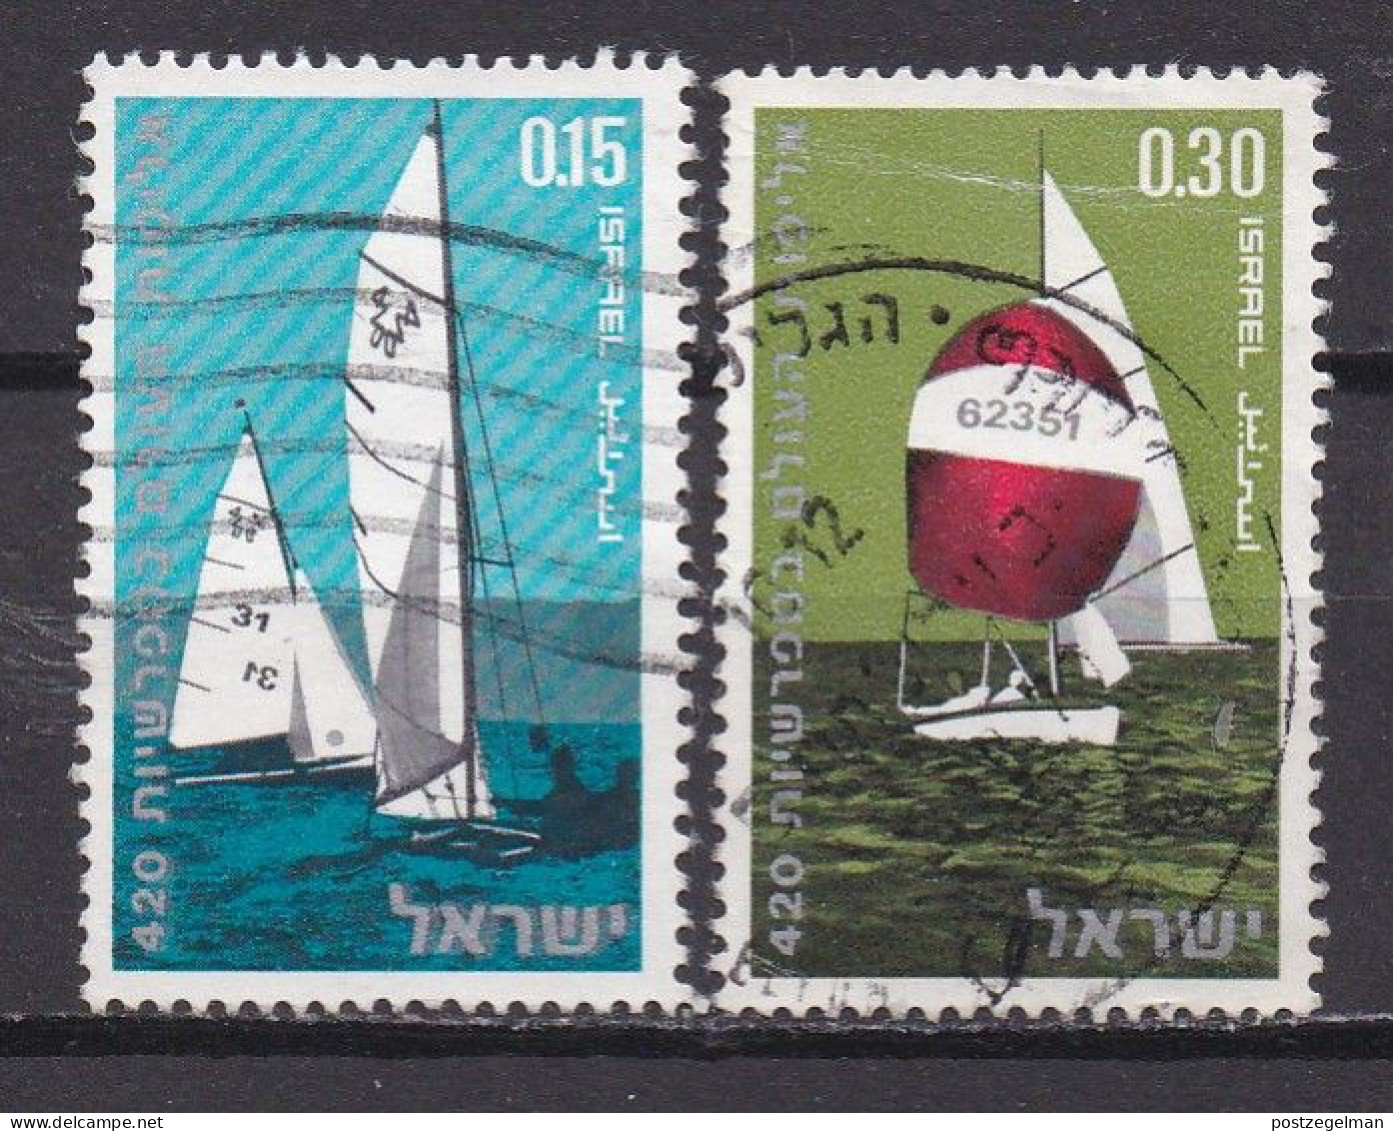 ISRAEL, 1970, Used Stamp(s), Without Tab, Sailing Championship, SG Number 451-453, Scan Number 17411 (2 Values) - Oblitérés (sans Tabs)